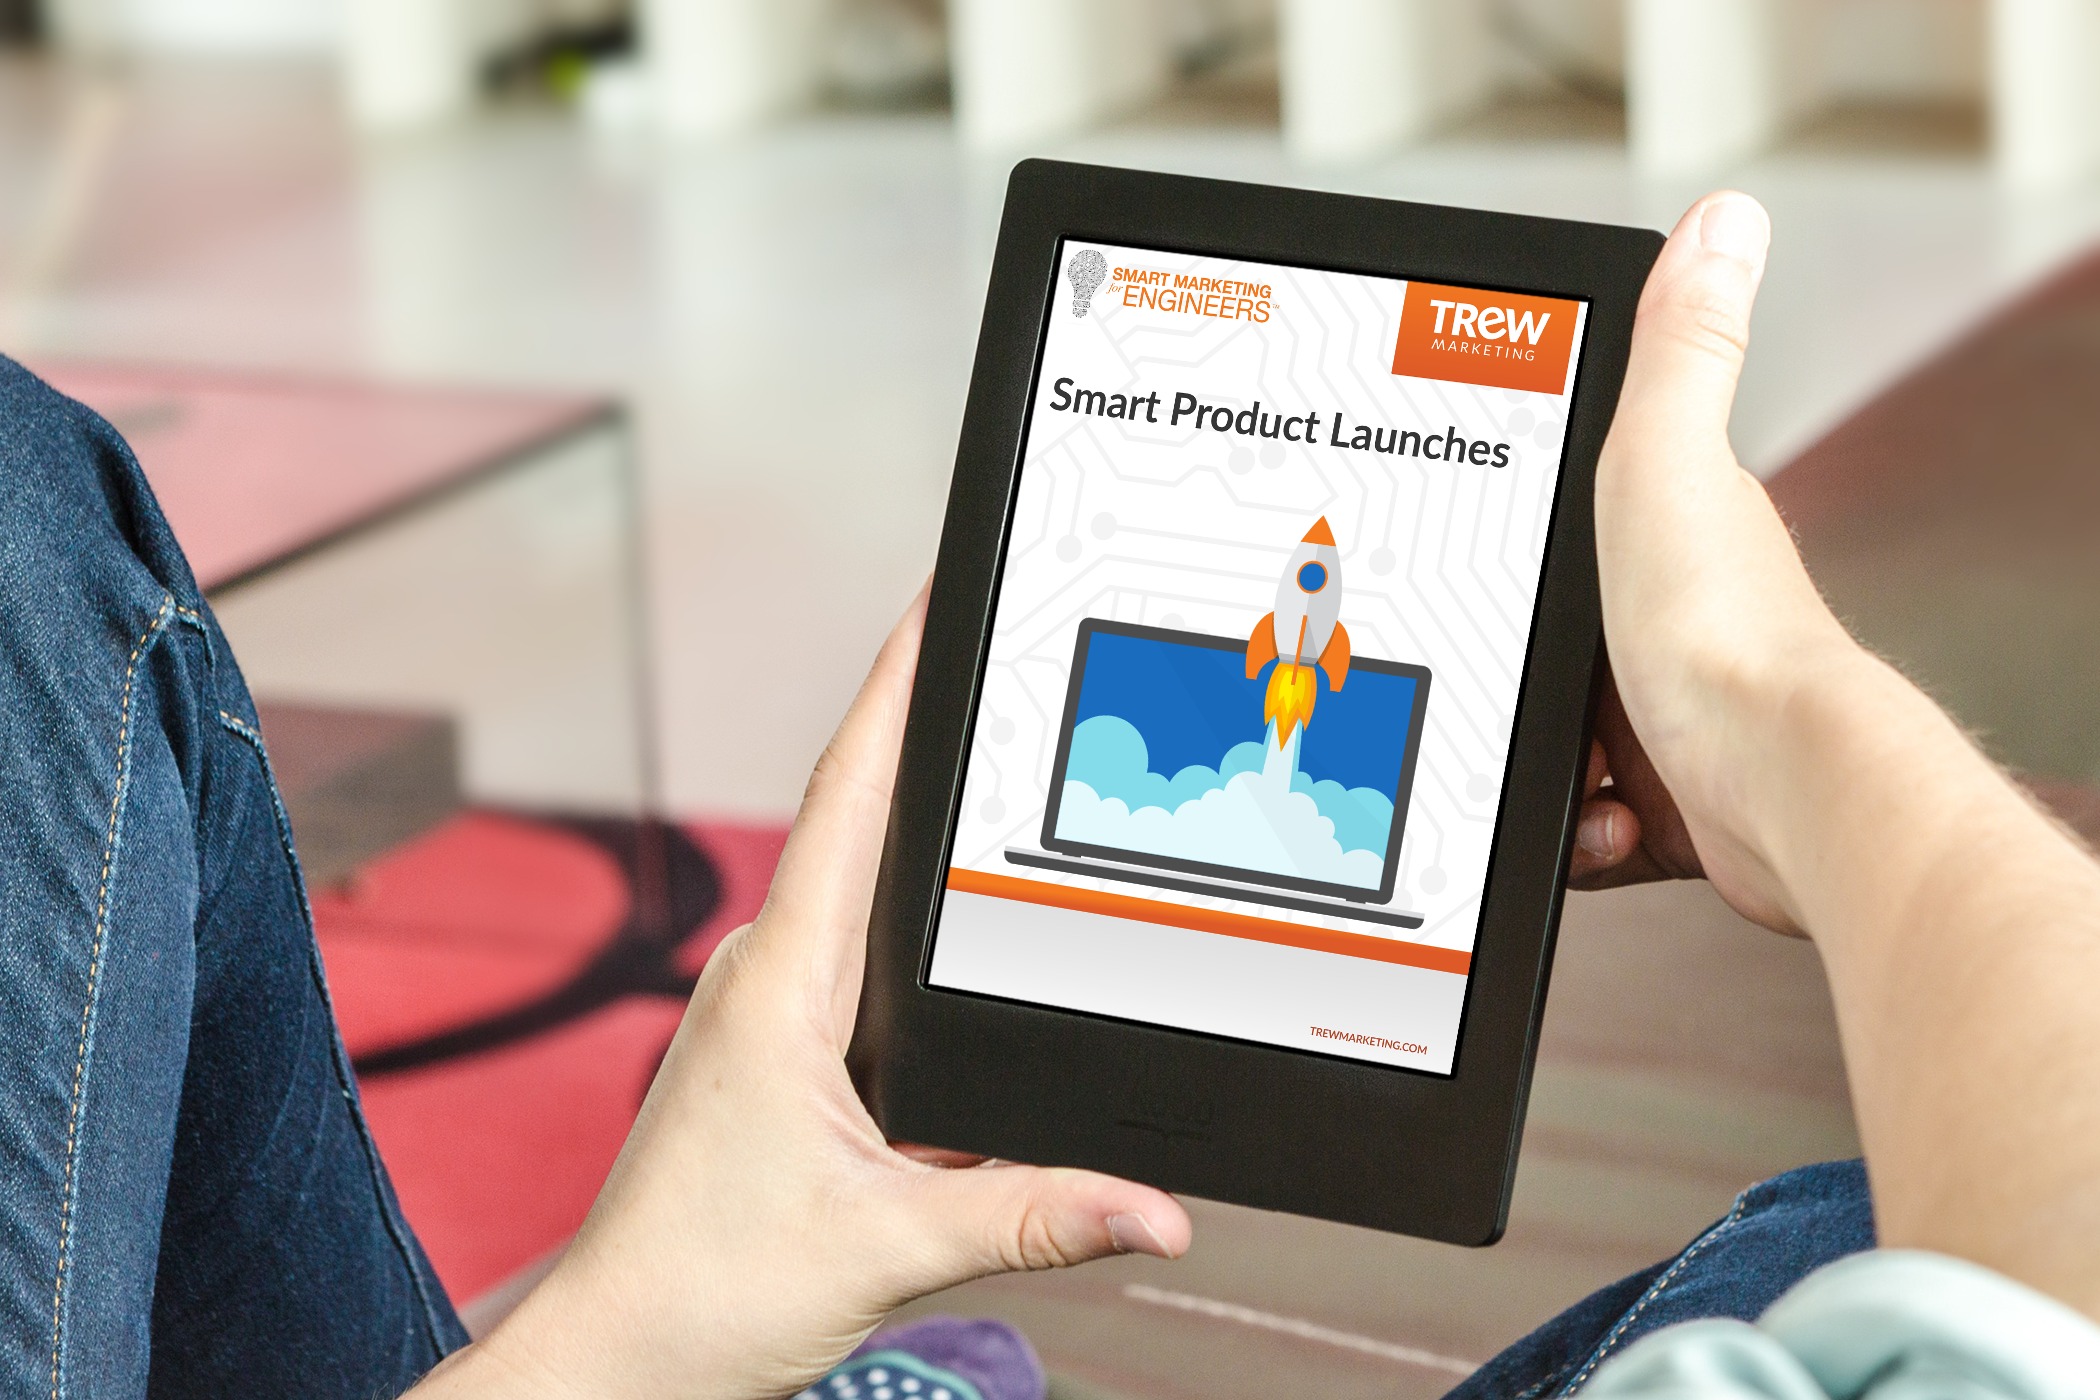 Smart Product Launches Ebook Mockup 2